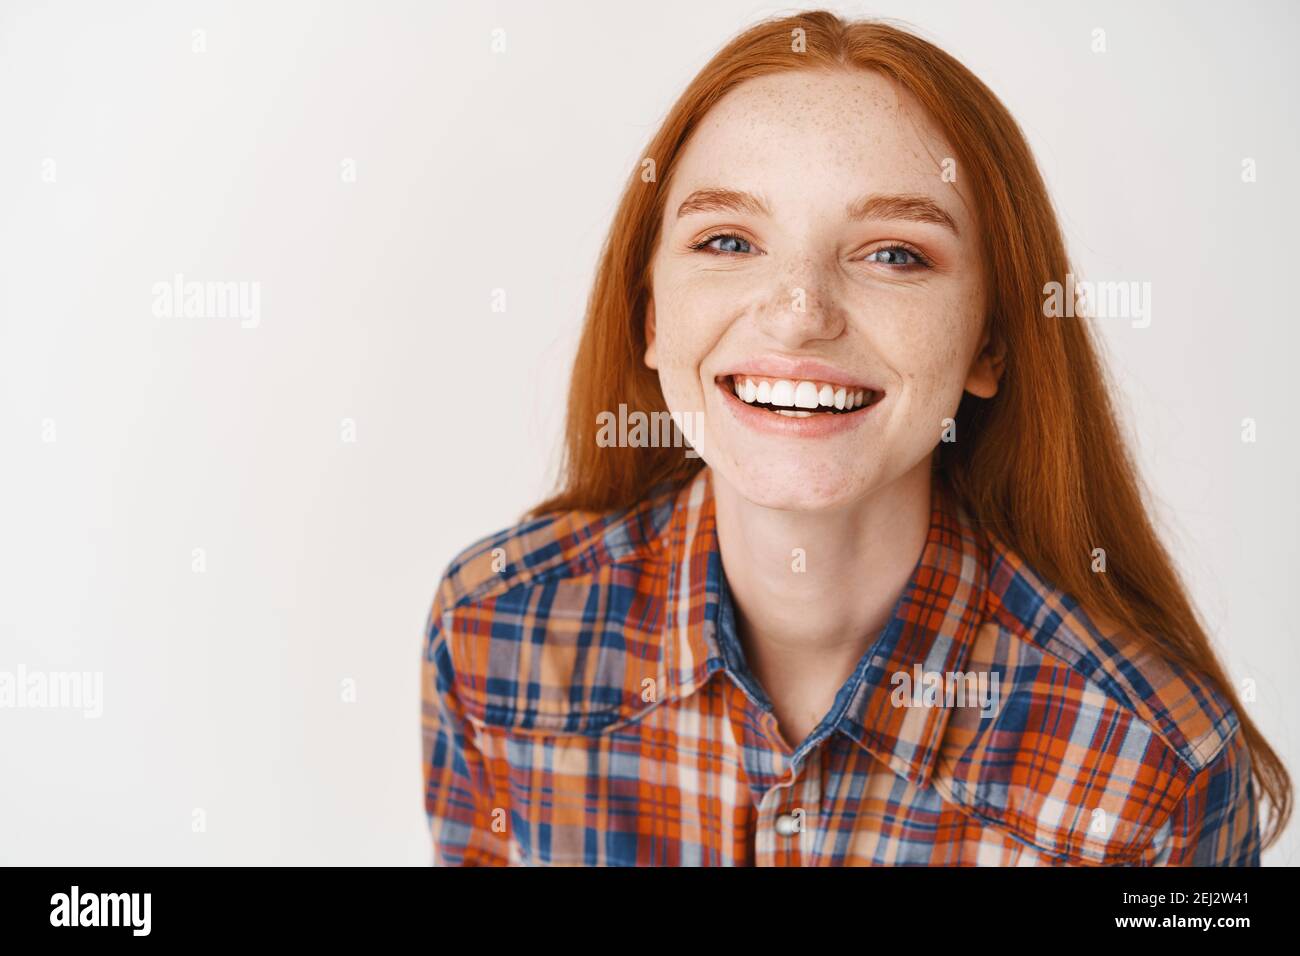 Close-up of beautiful redhead female model with pale skin and white teeth, smiling happy at camera, standing over white background Stock Photo